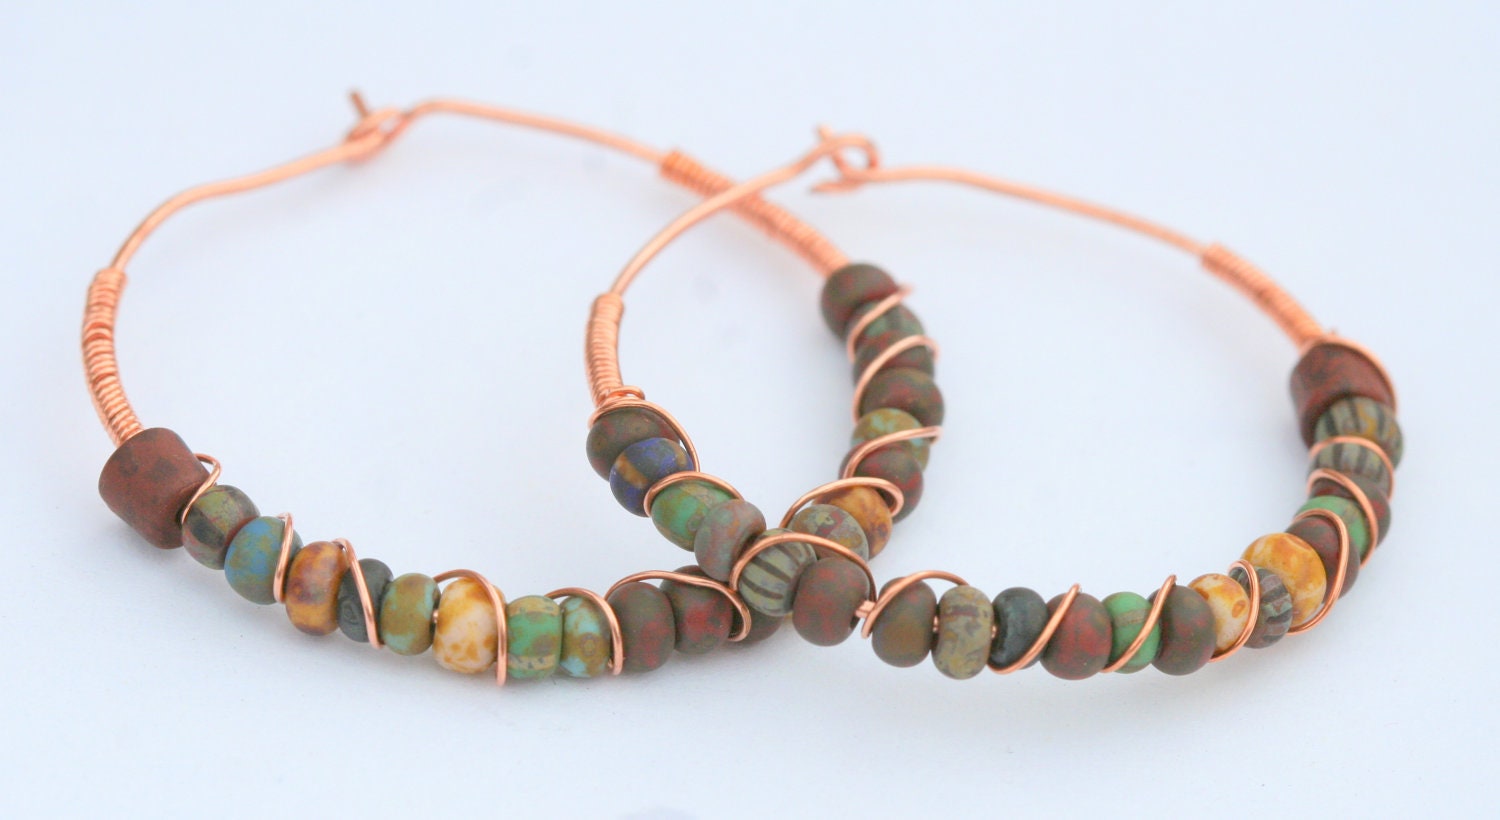 Copper Wire Wrapped Hoop Earrings with Glass Beads - LesleyPridgen